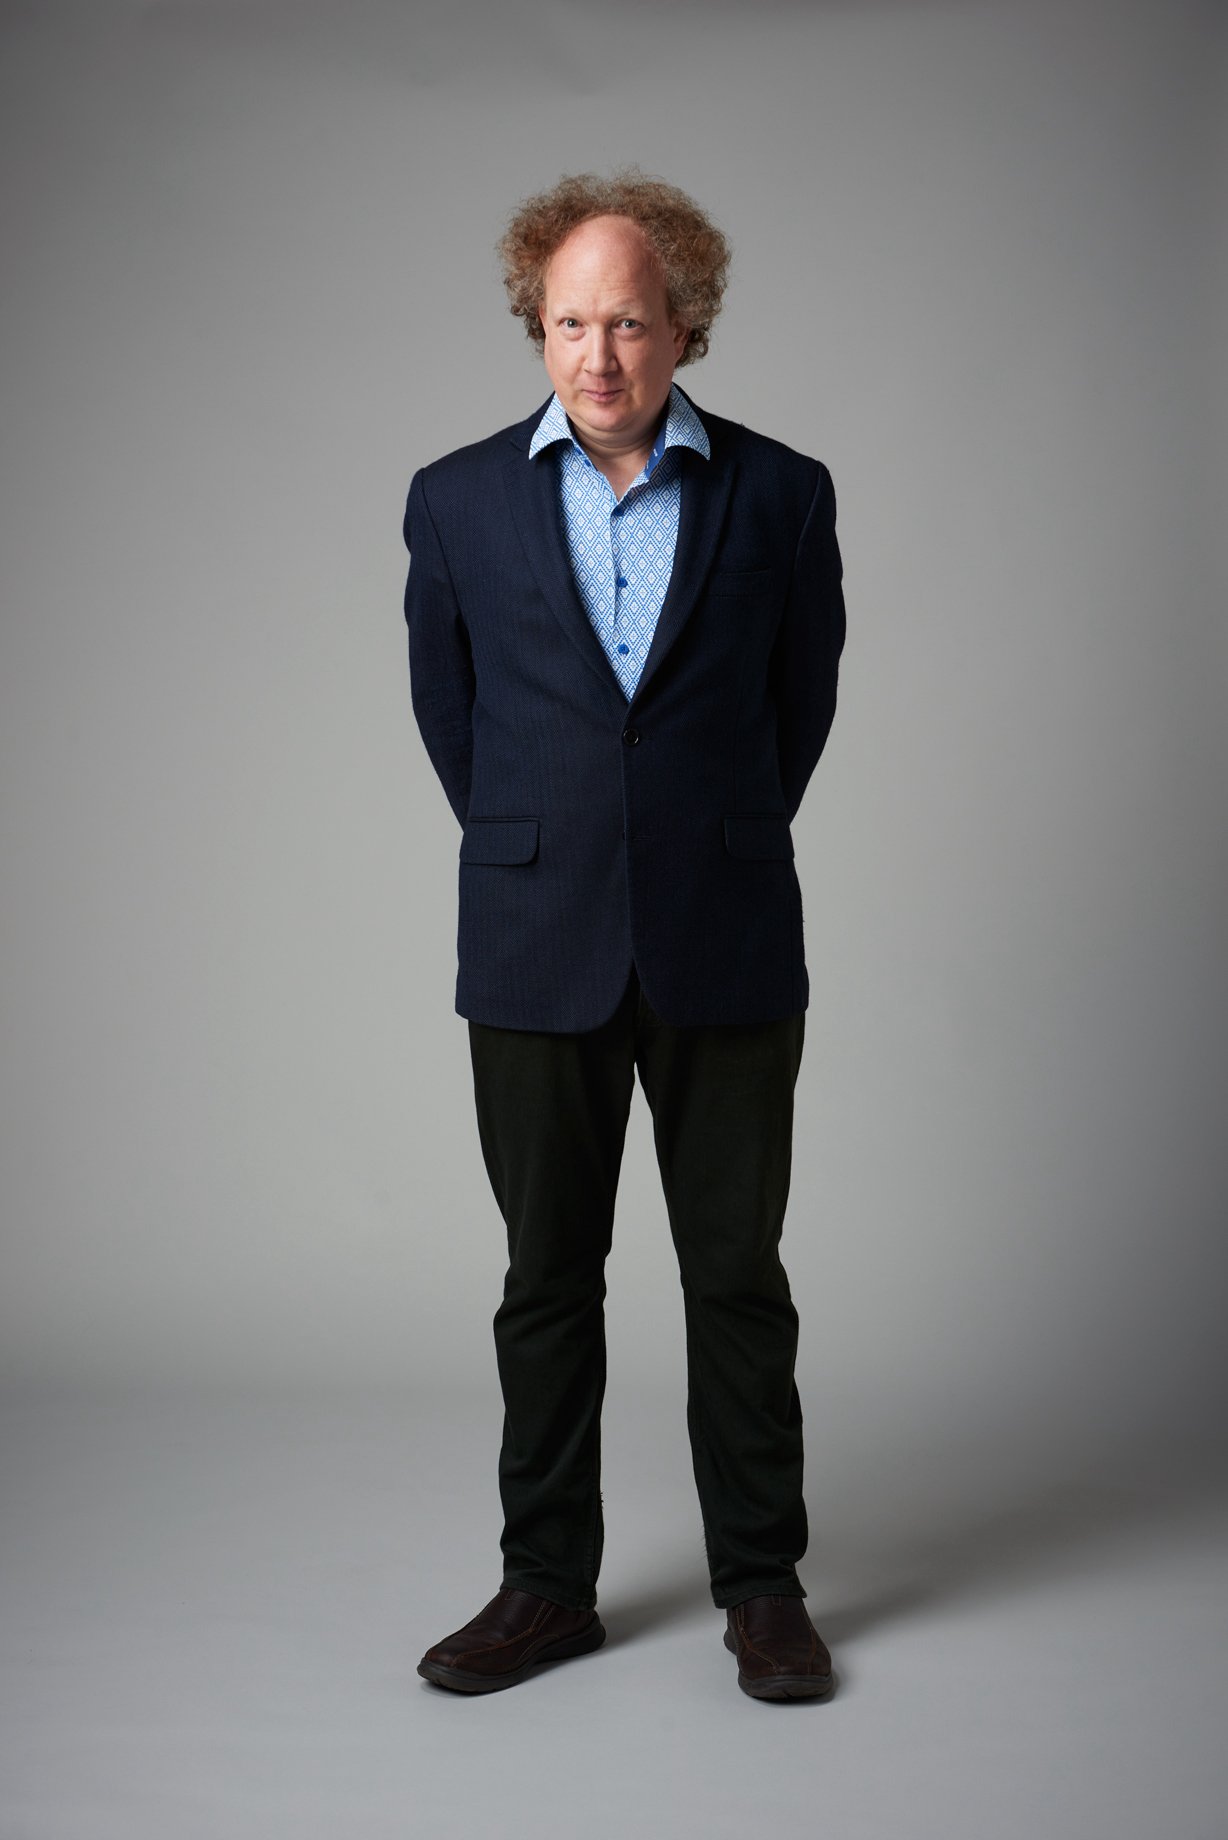  A full-length shot of Andy Zaltzman - a white, balding older man with curly brown hair. He is wearing a navy blue suit and standing with his arms behind his back whilst he smiled secretly at the camera. 